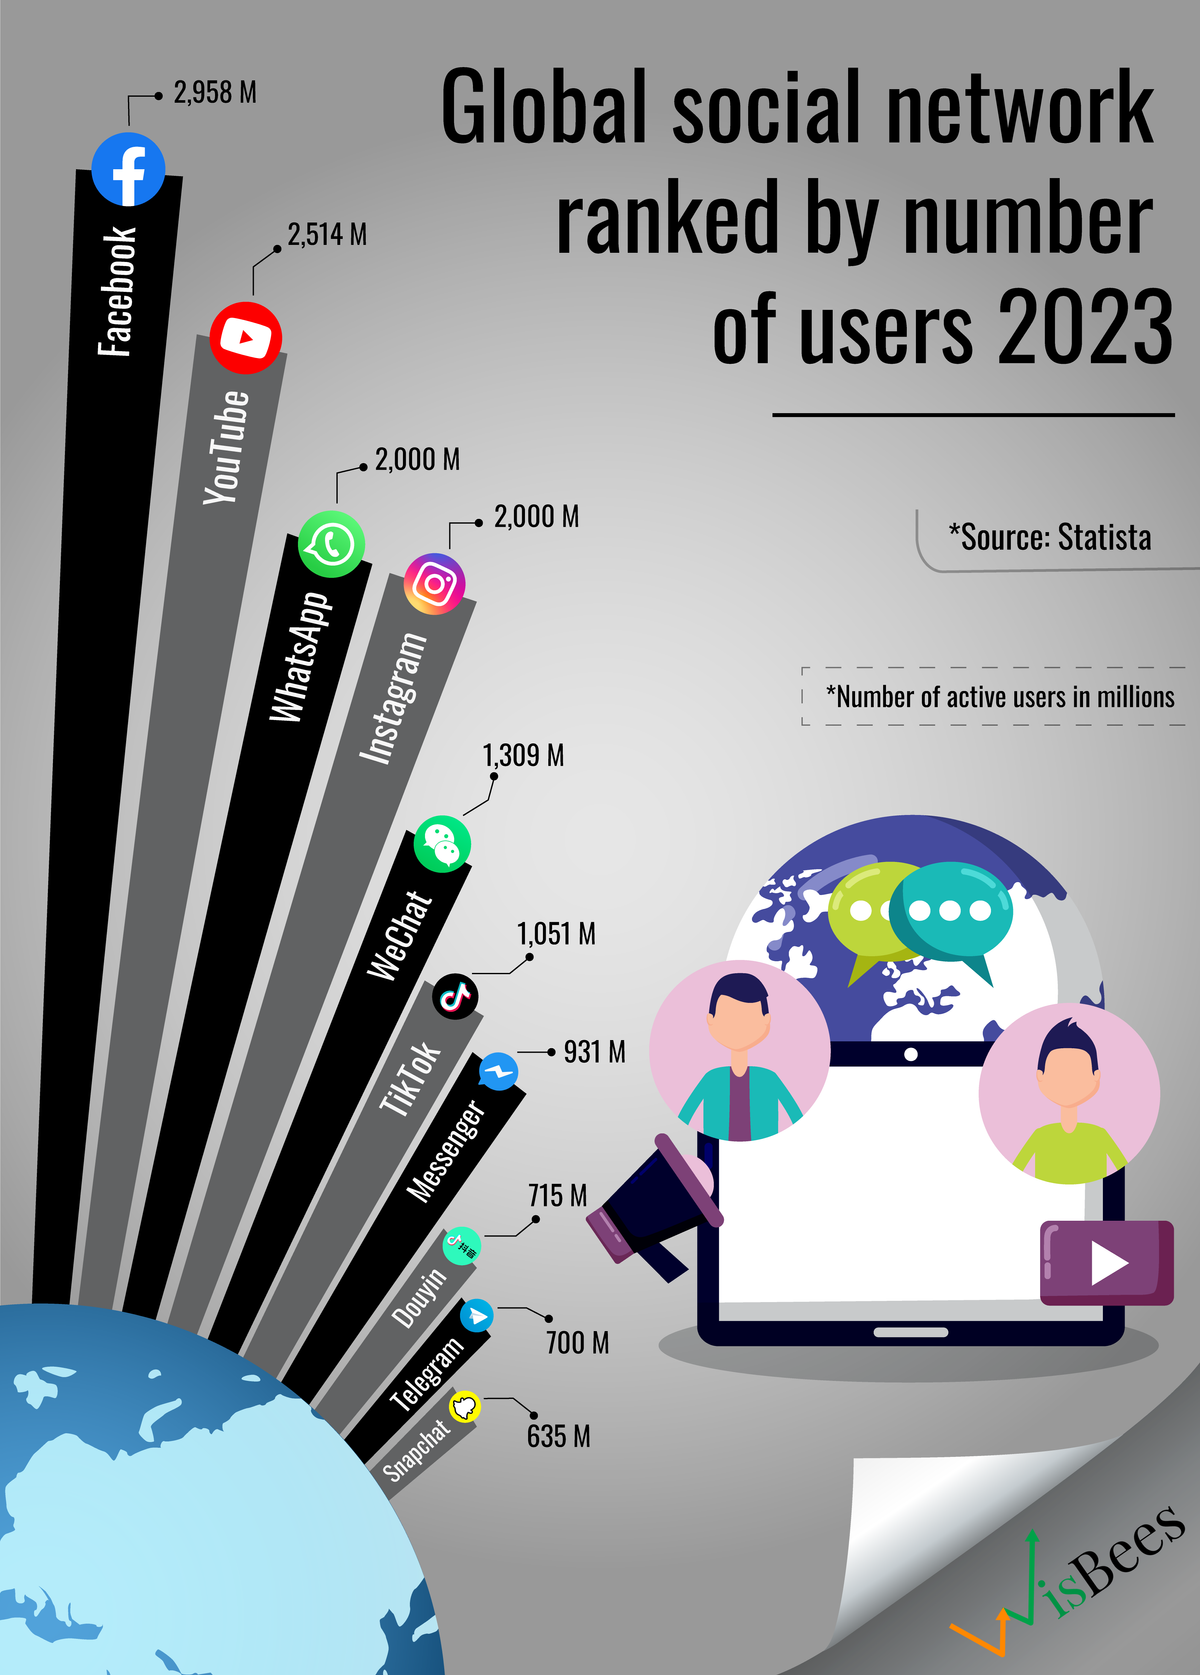 Which social media platform in the world has the highest number of users?